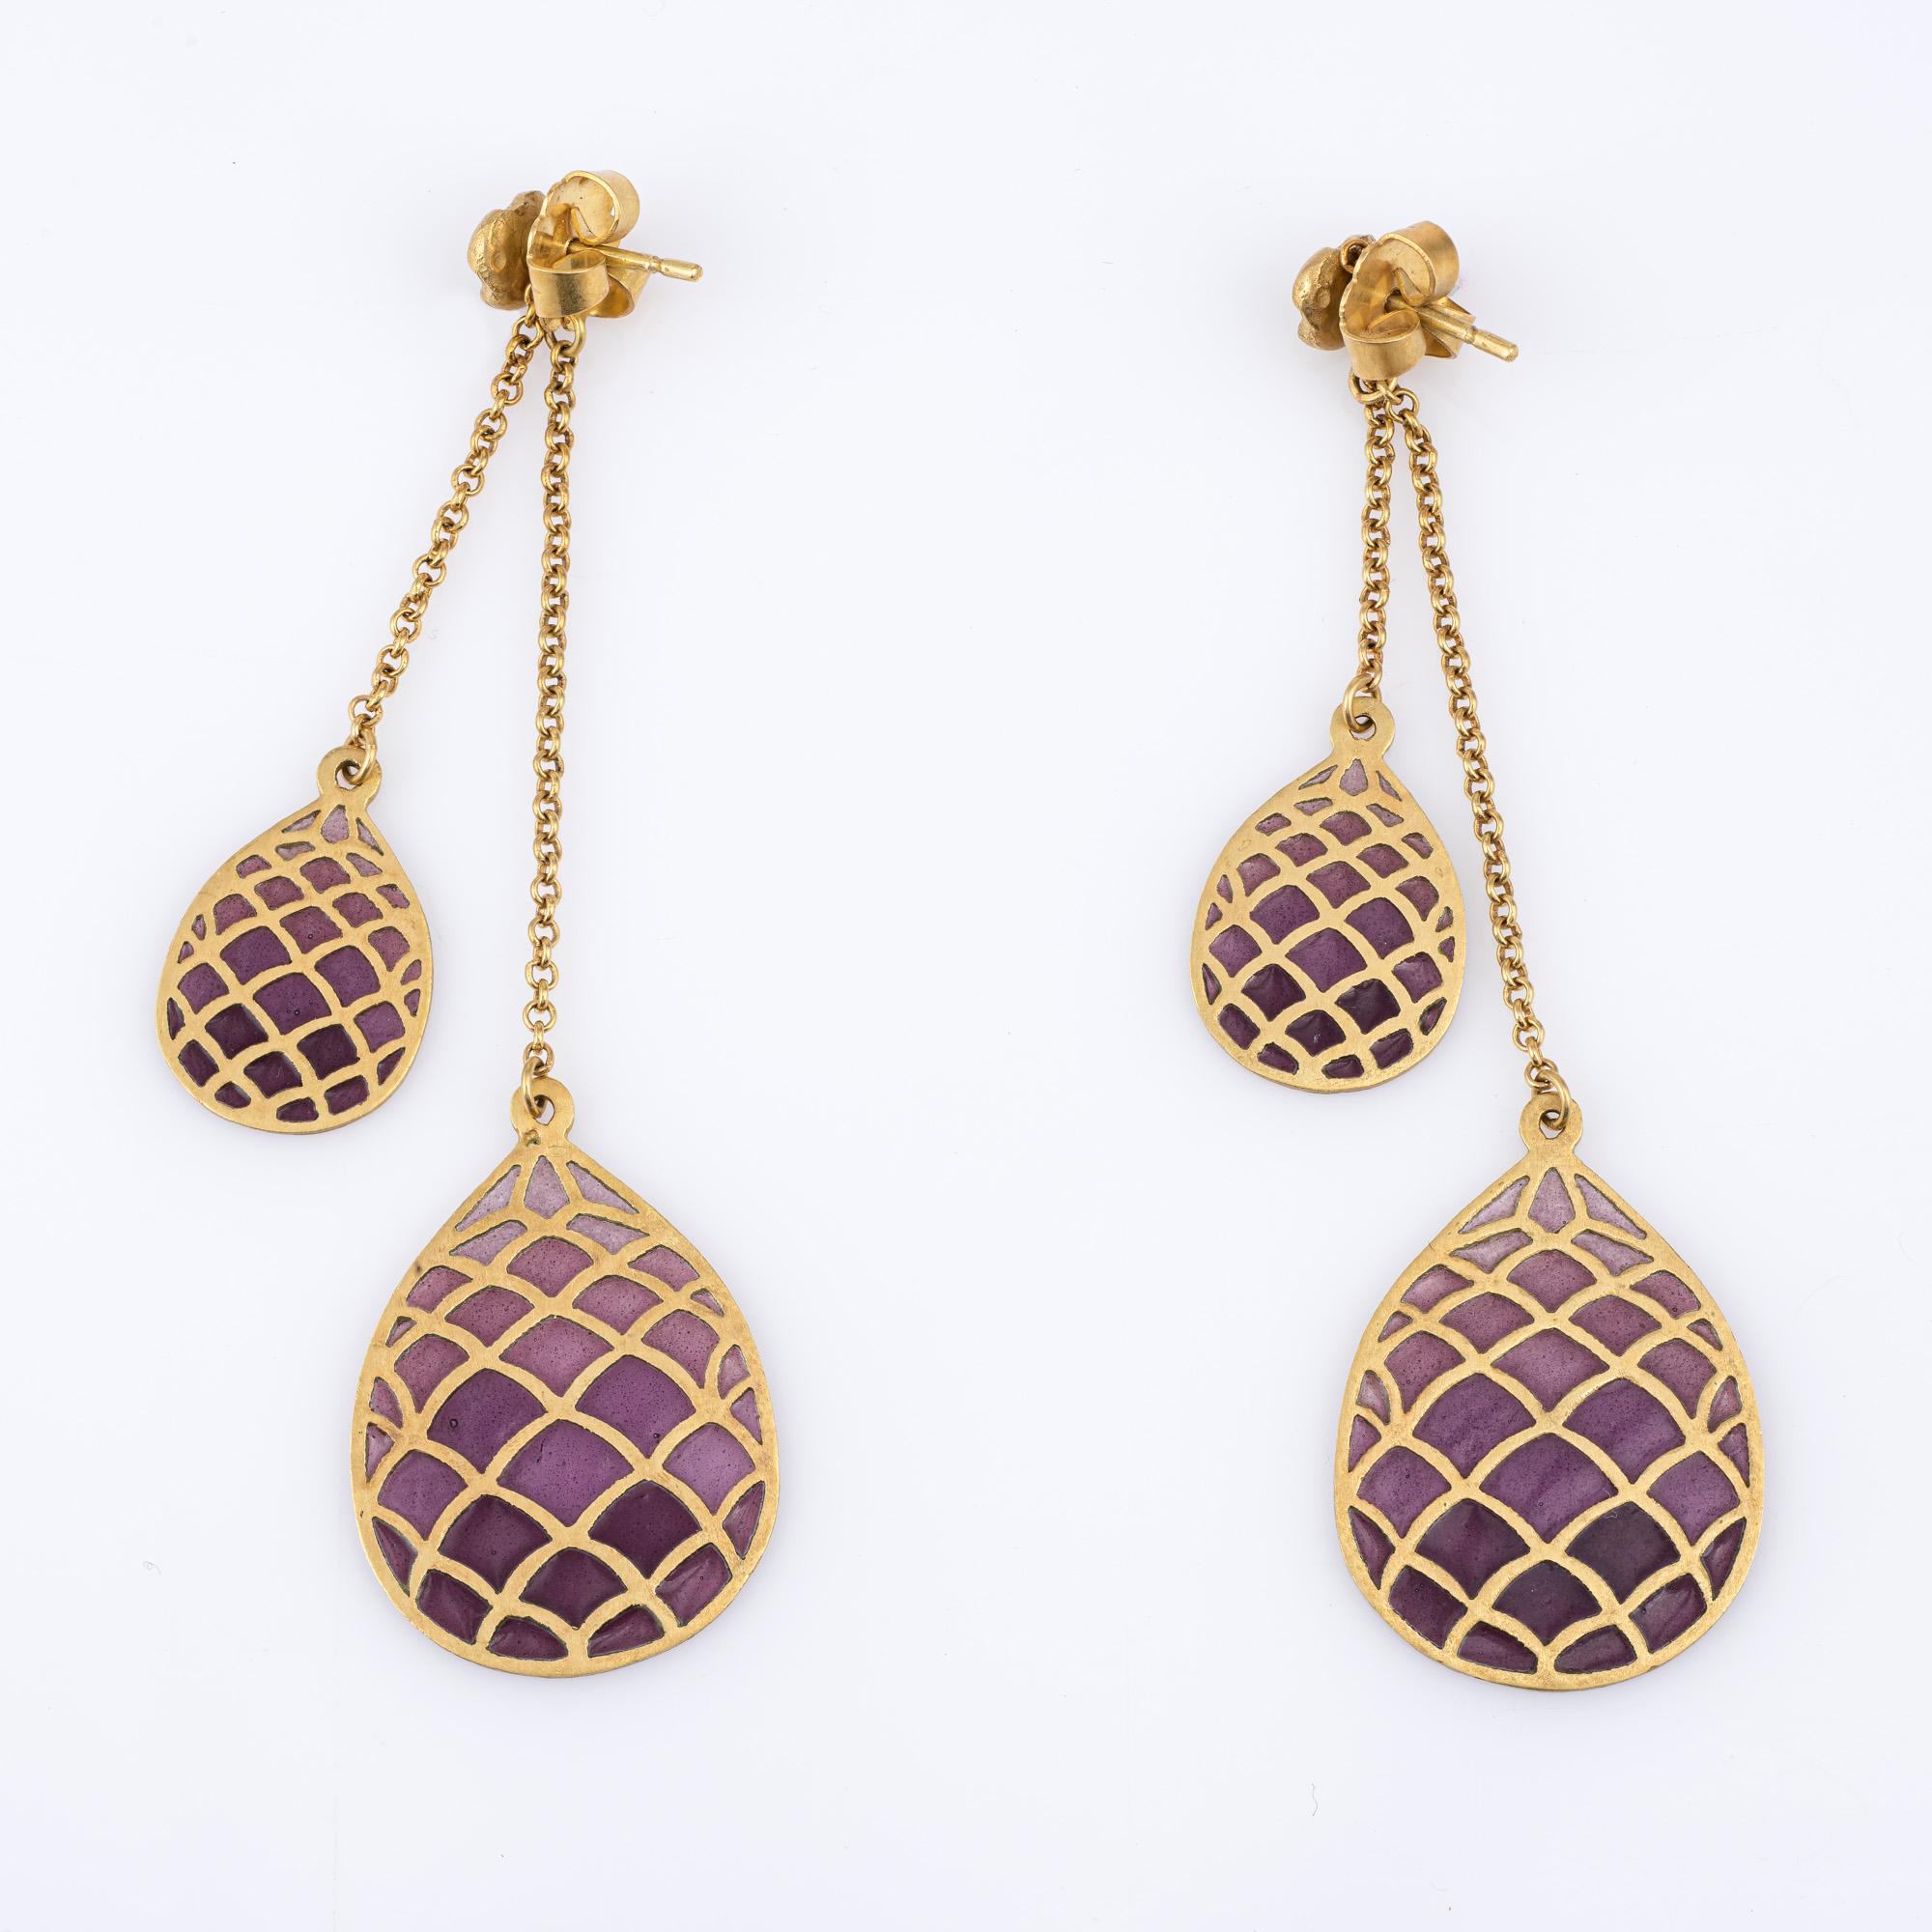 Elegant pair of contemporary estate plique a jour enamel earrings crafted in 18k yellow gold. 

The stylish earrings measure 2.75 inches for a dramatic day or evening look. Plique a jour enamel in shades of light to darker purple is set into the